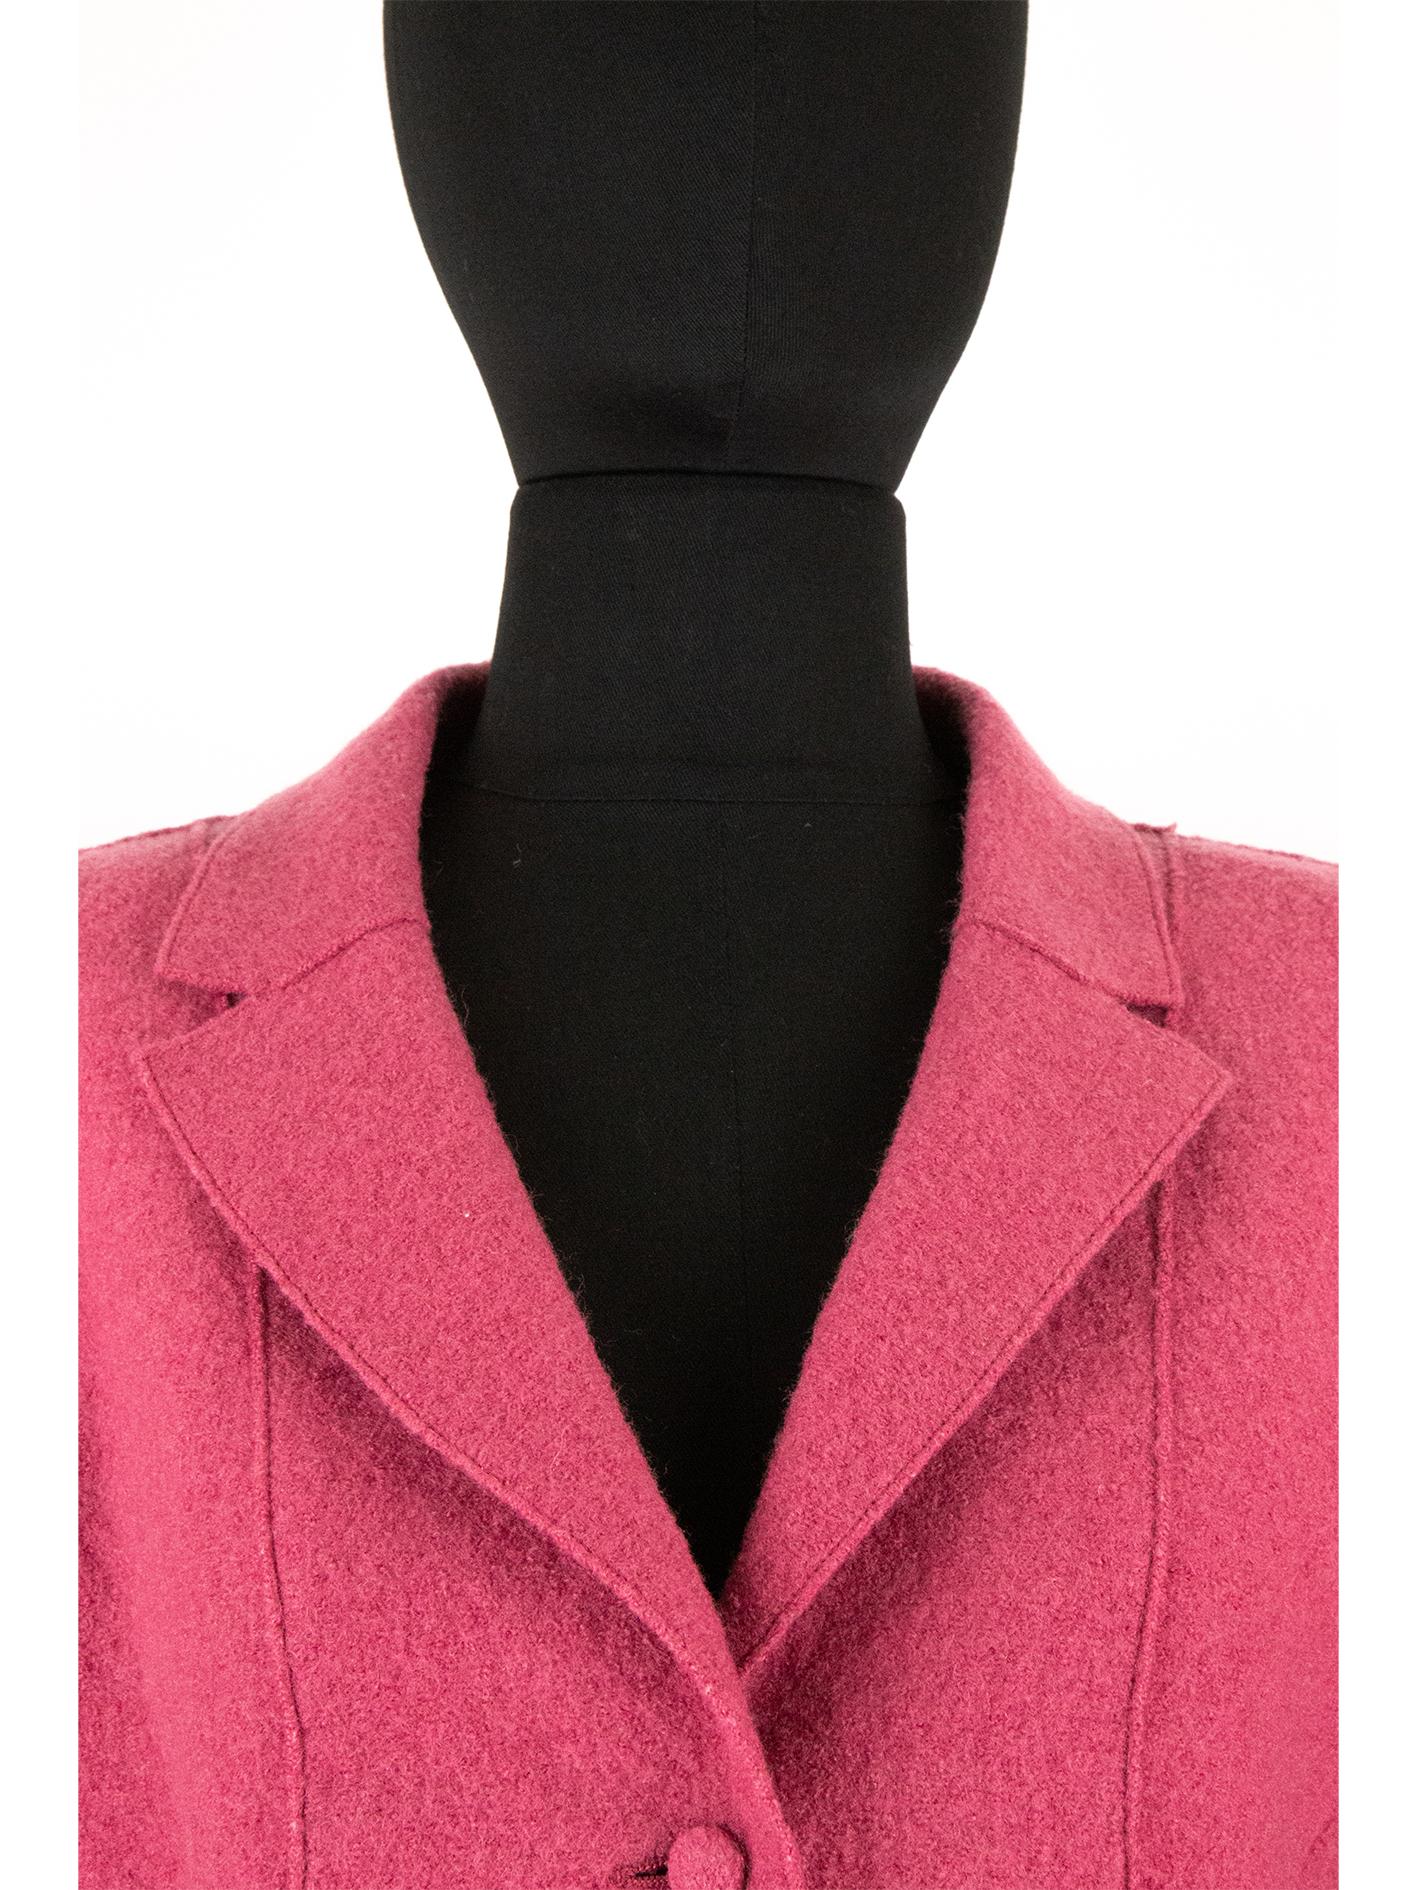 A 2000s Chanel boucle woollen jacket in a punch pink with a tailored bodice composed of curved exposed dart seams, creating a flattering silhouette on the body. The bodice includes a notched lapel collar, pockets and is fastened with self-covered